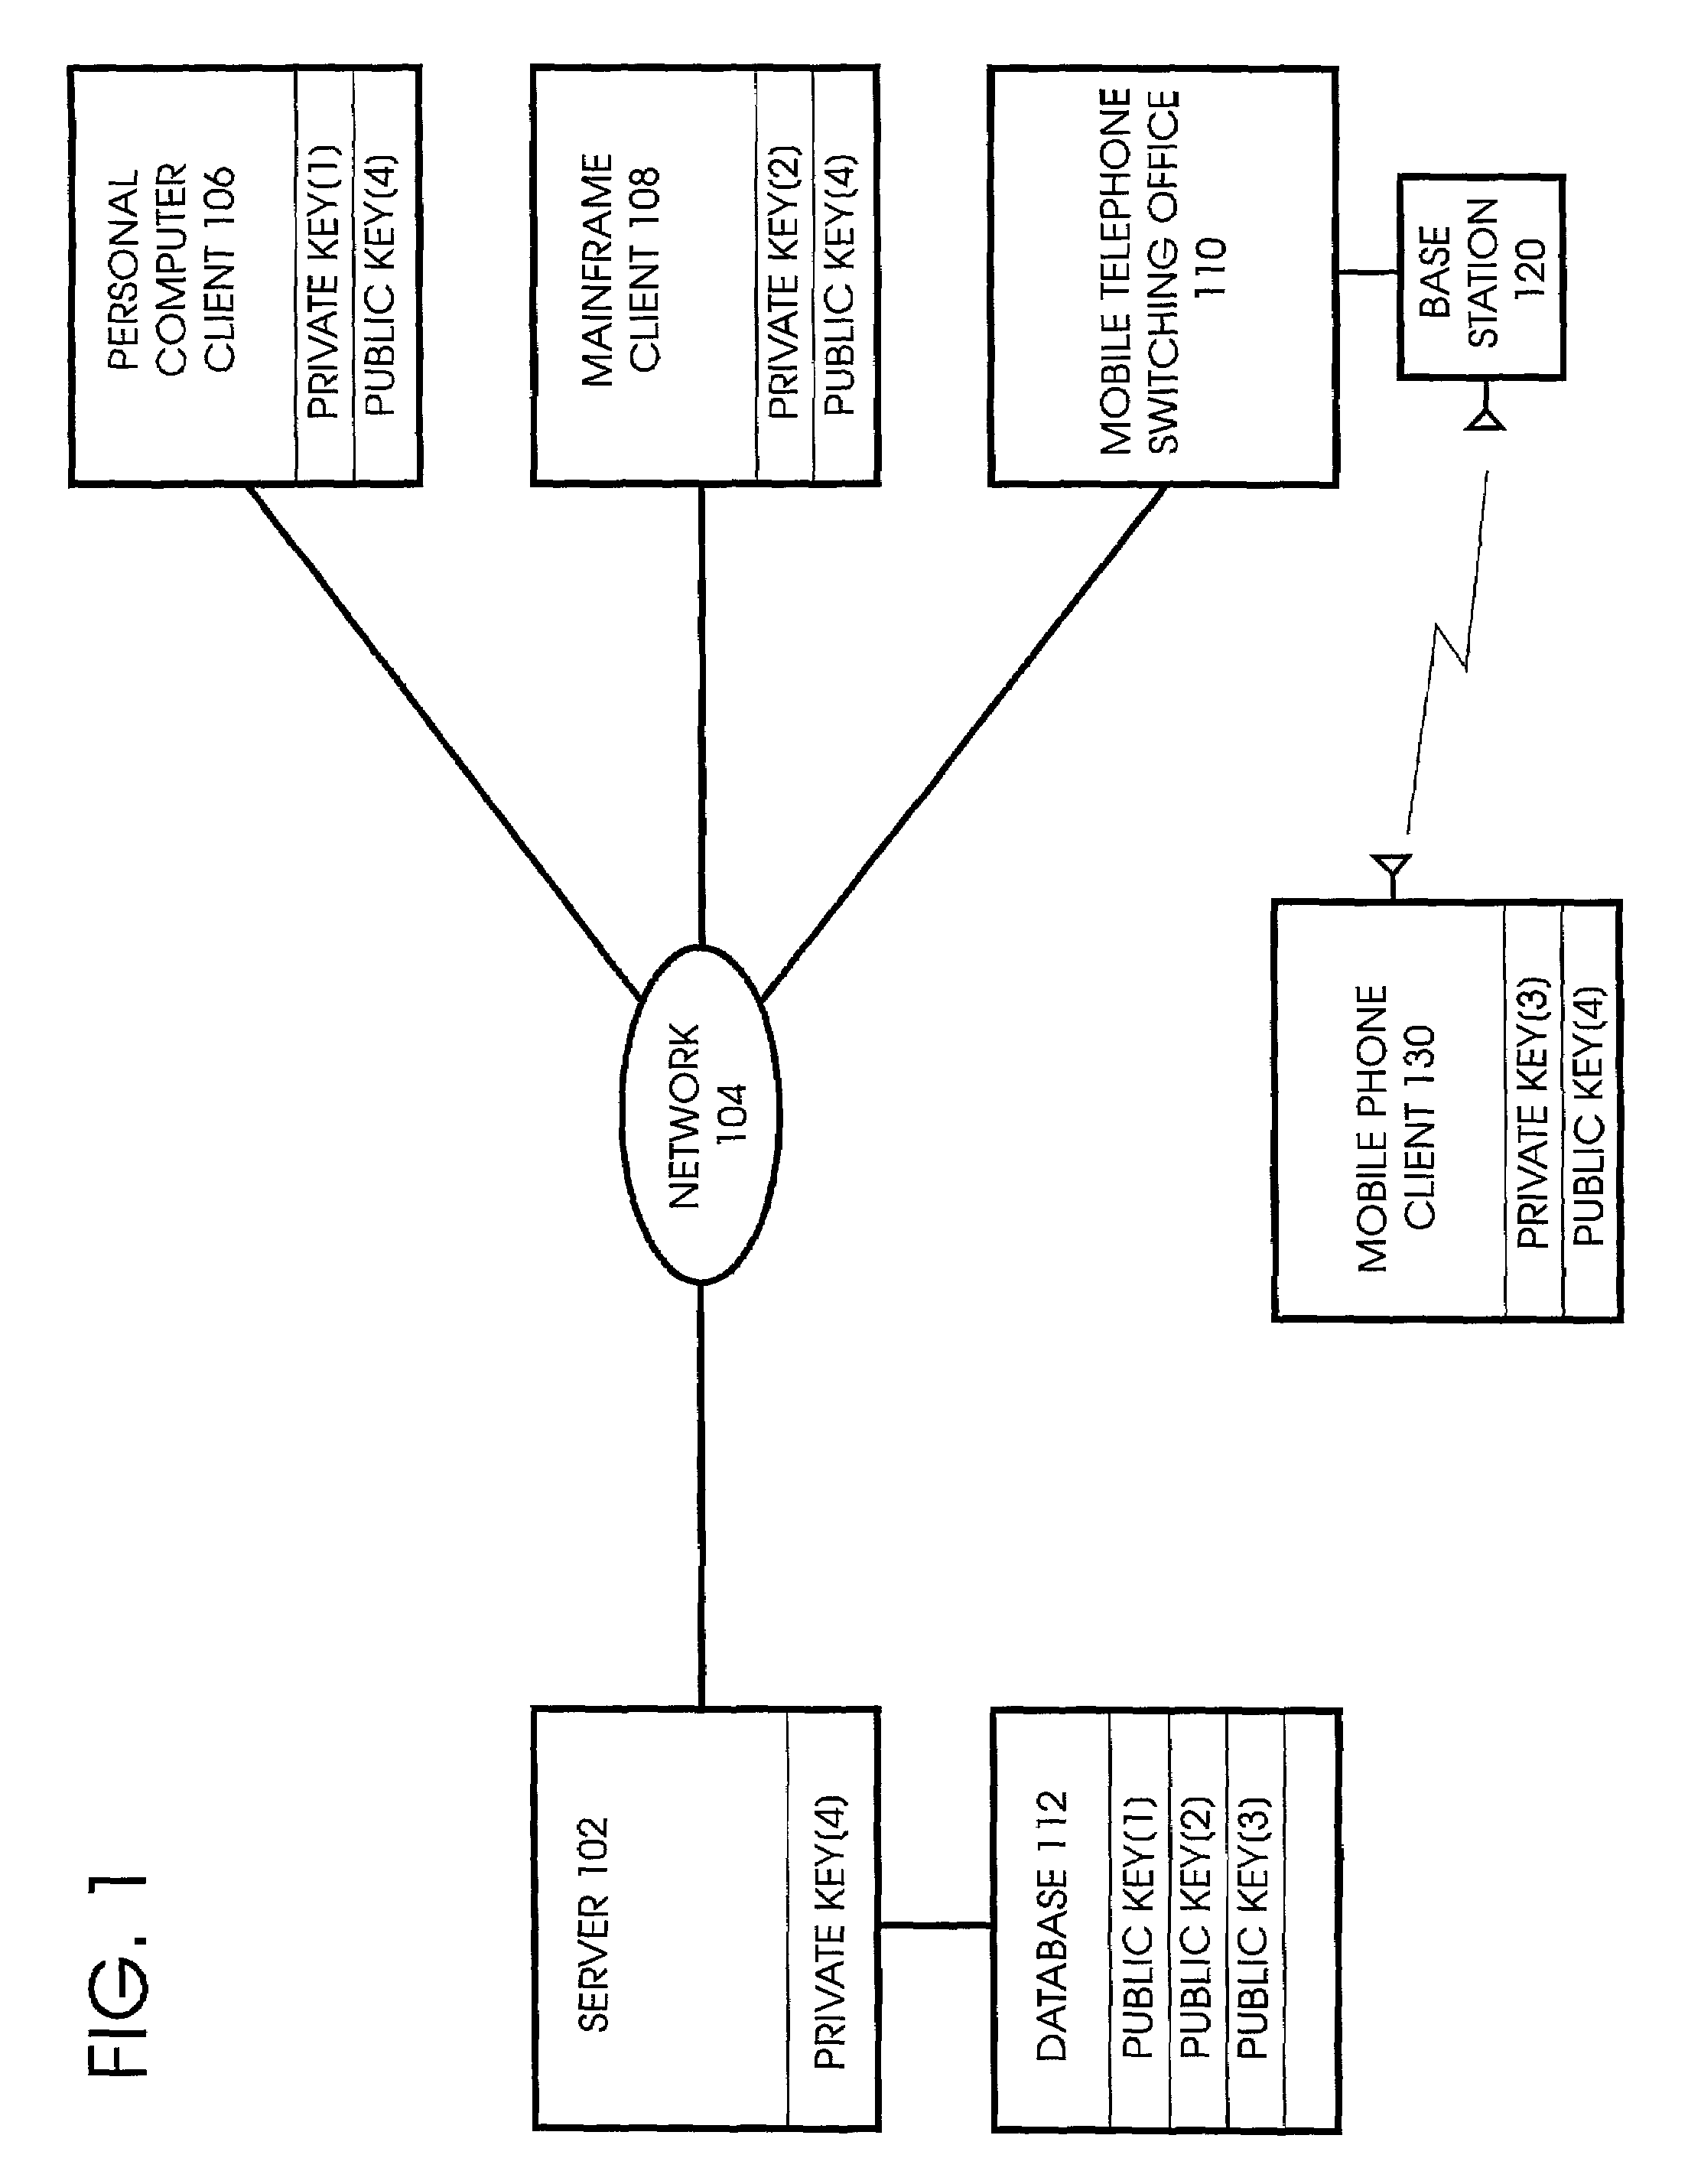 Efficient and compact subgroup trace representation ("XTR")